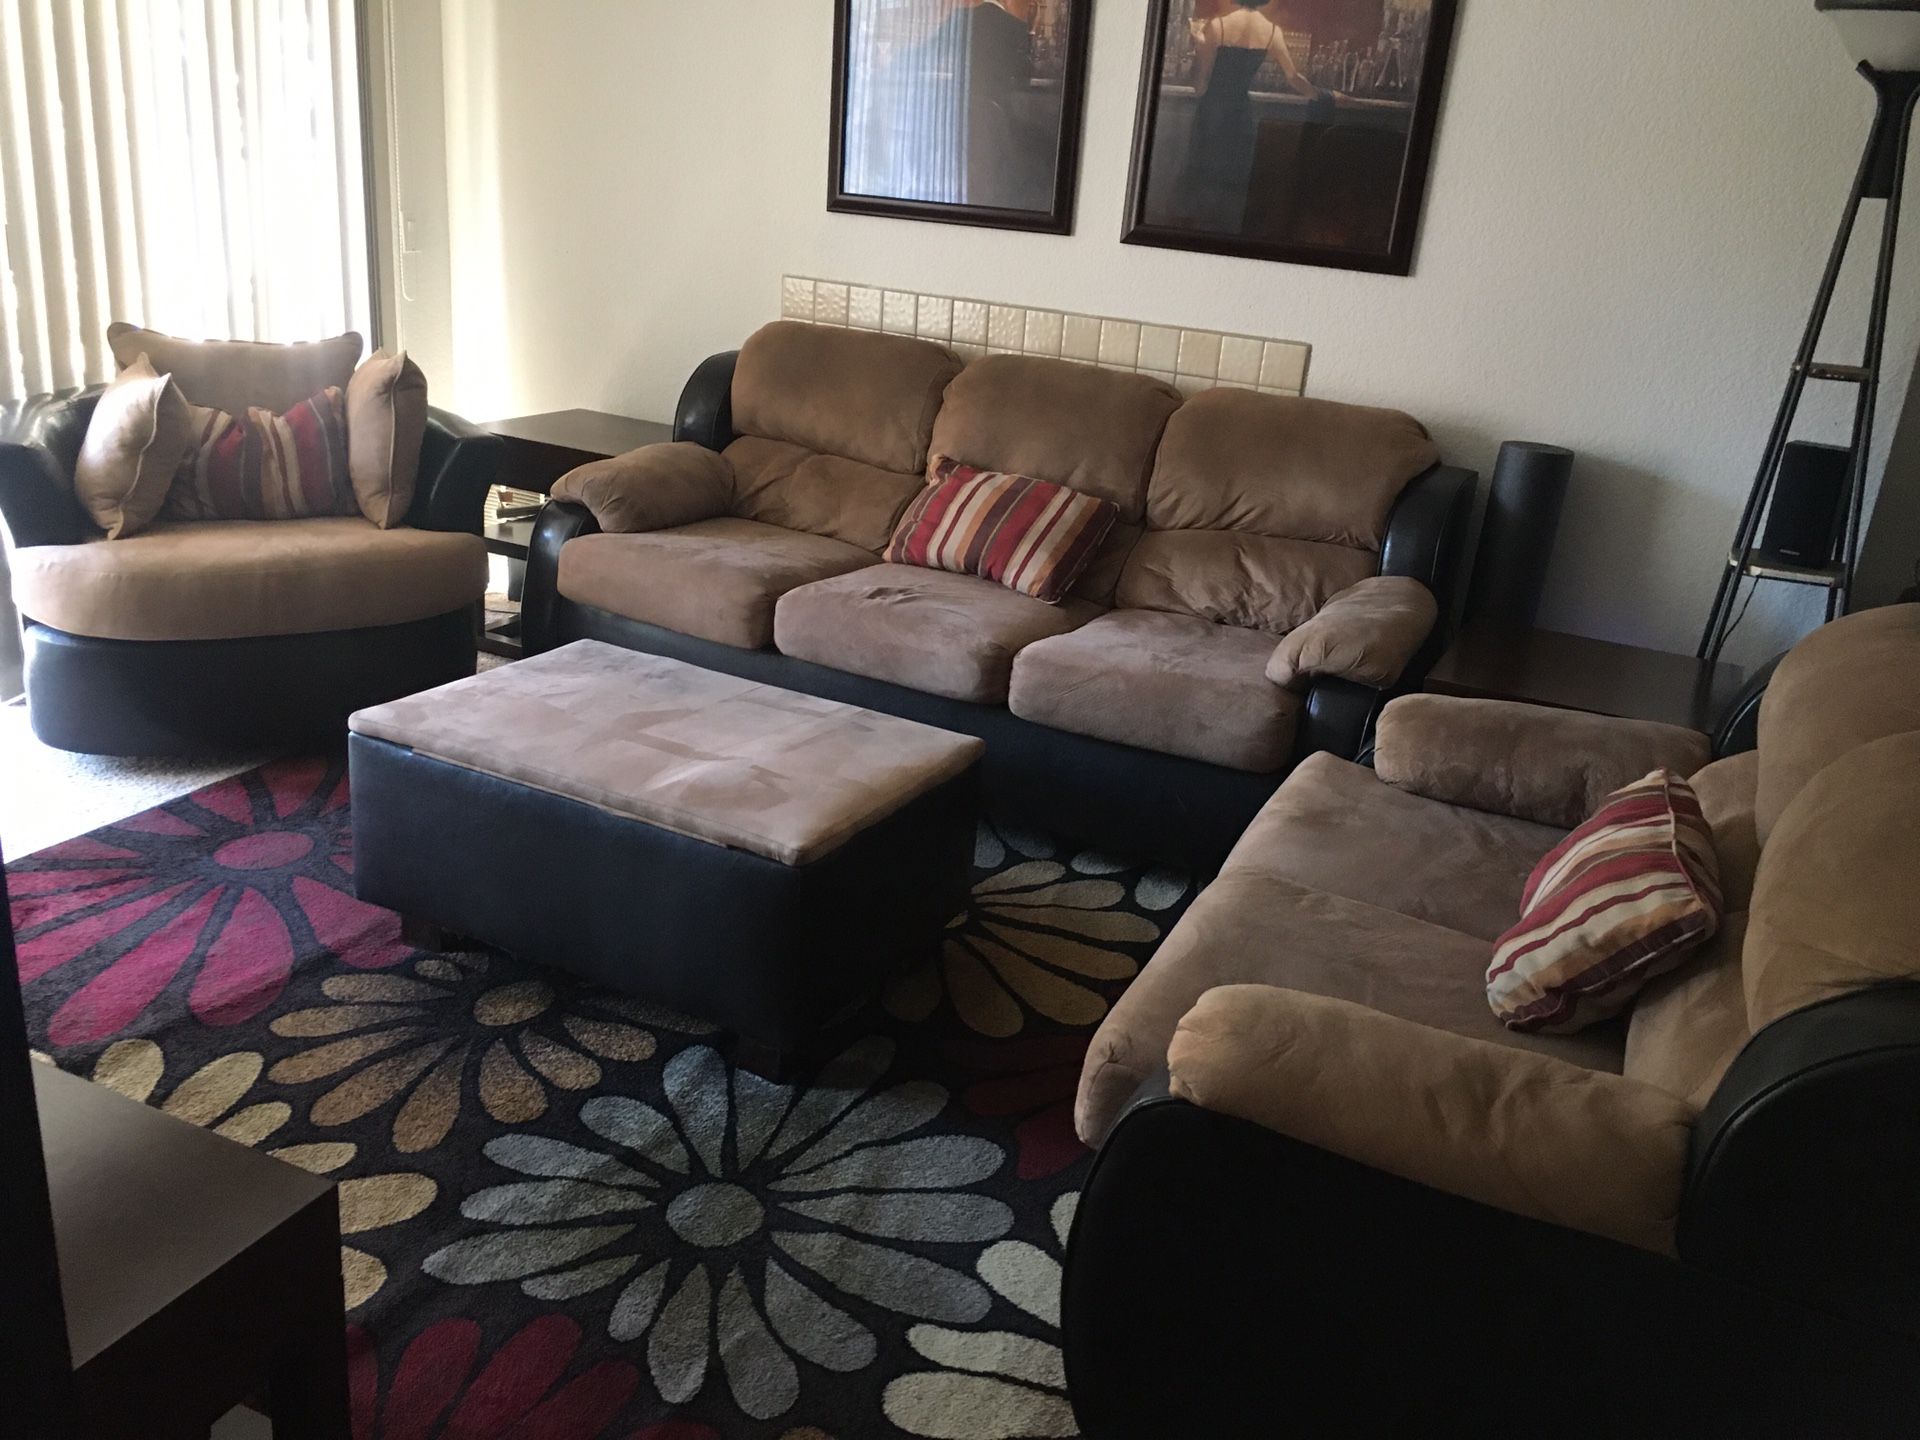 Living room set - Couch, love seat, chair w/ ottoman, end tables & tv stand